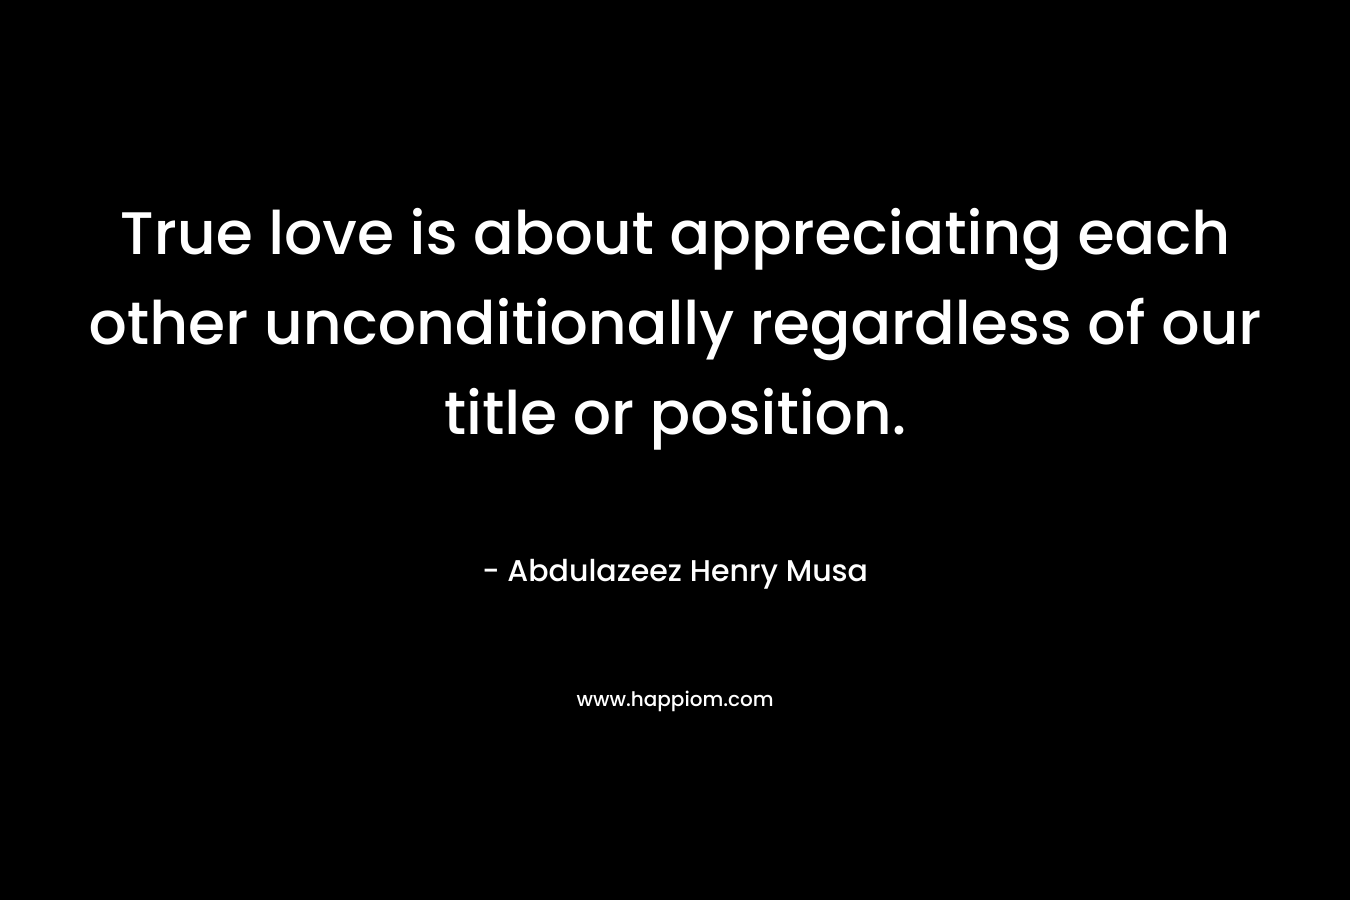 True love is about appreciating each other unconditionally regardless of our title or position.